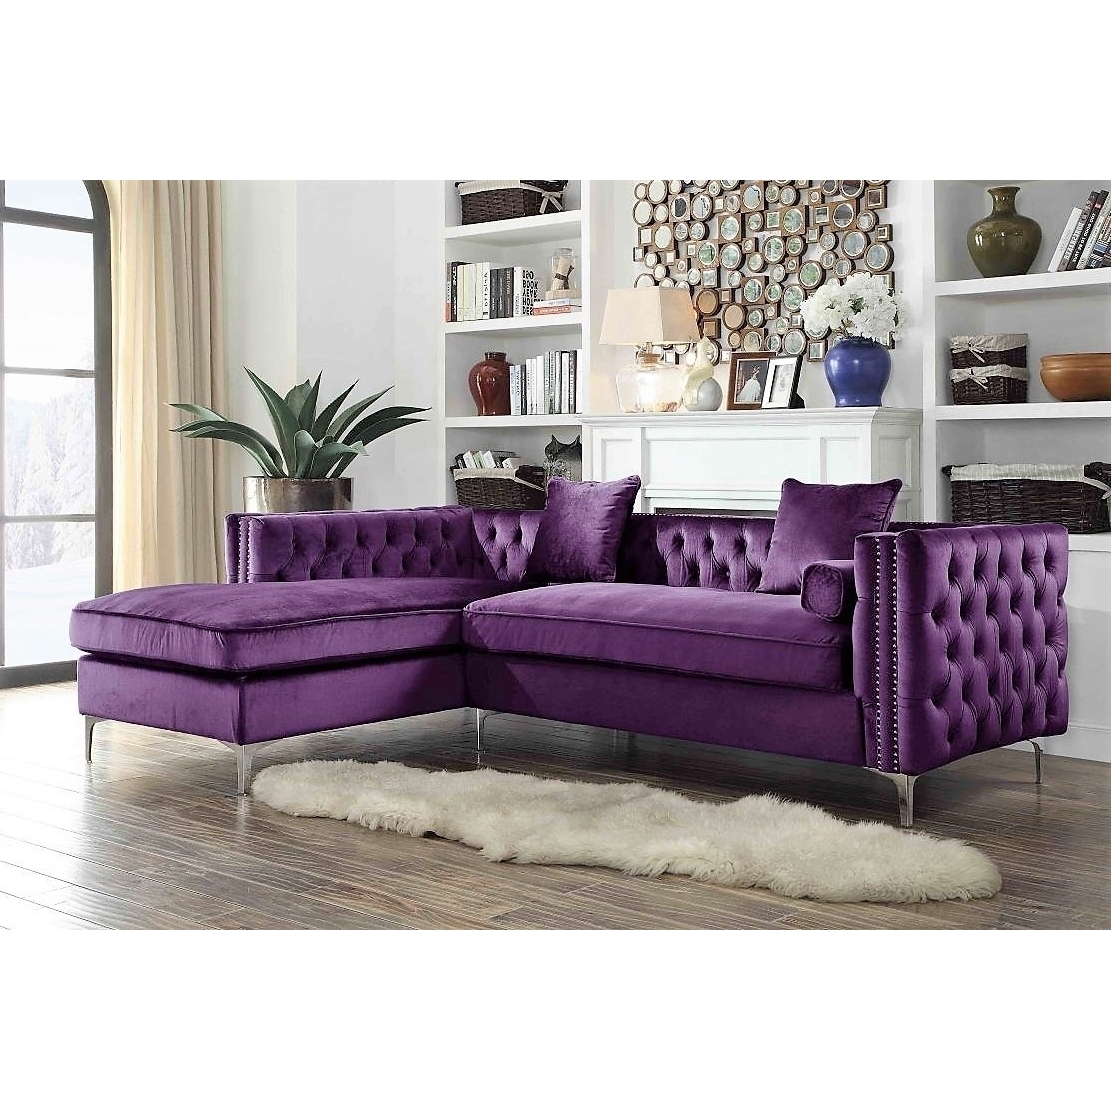 Picasso Velvet Left Facing Sectional Sofa Button Tufted With Silver Nailhead Trim Silvertone Metal Y-leg - Purple